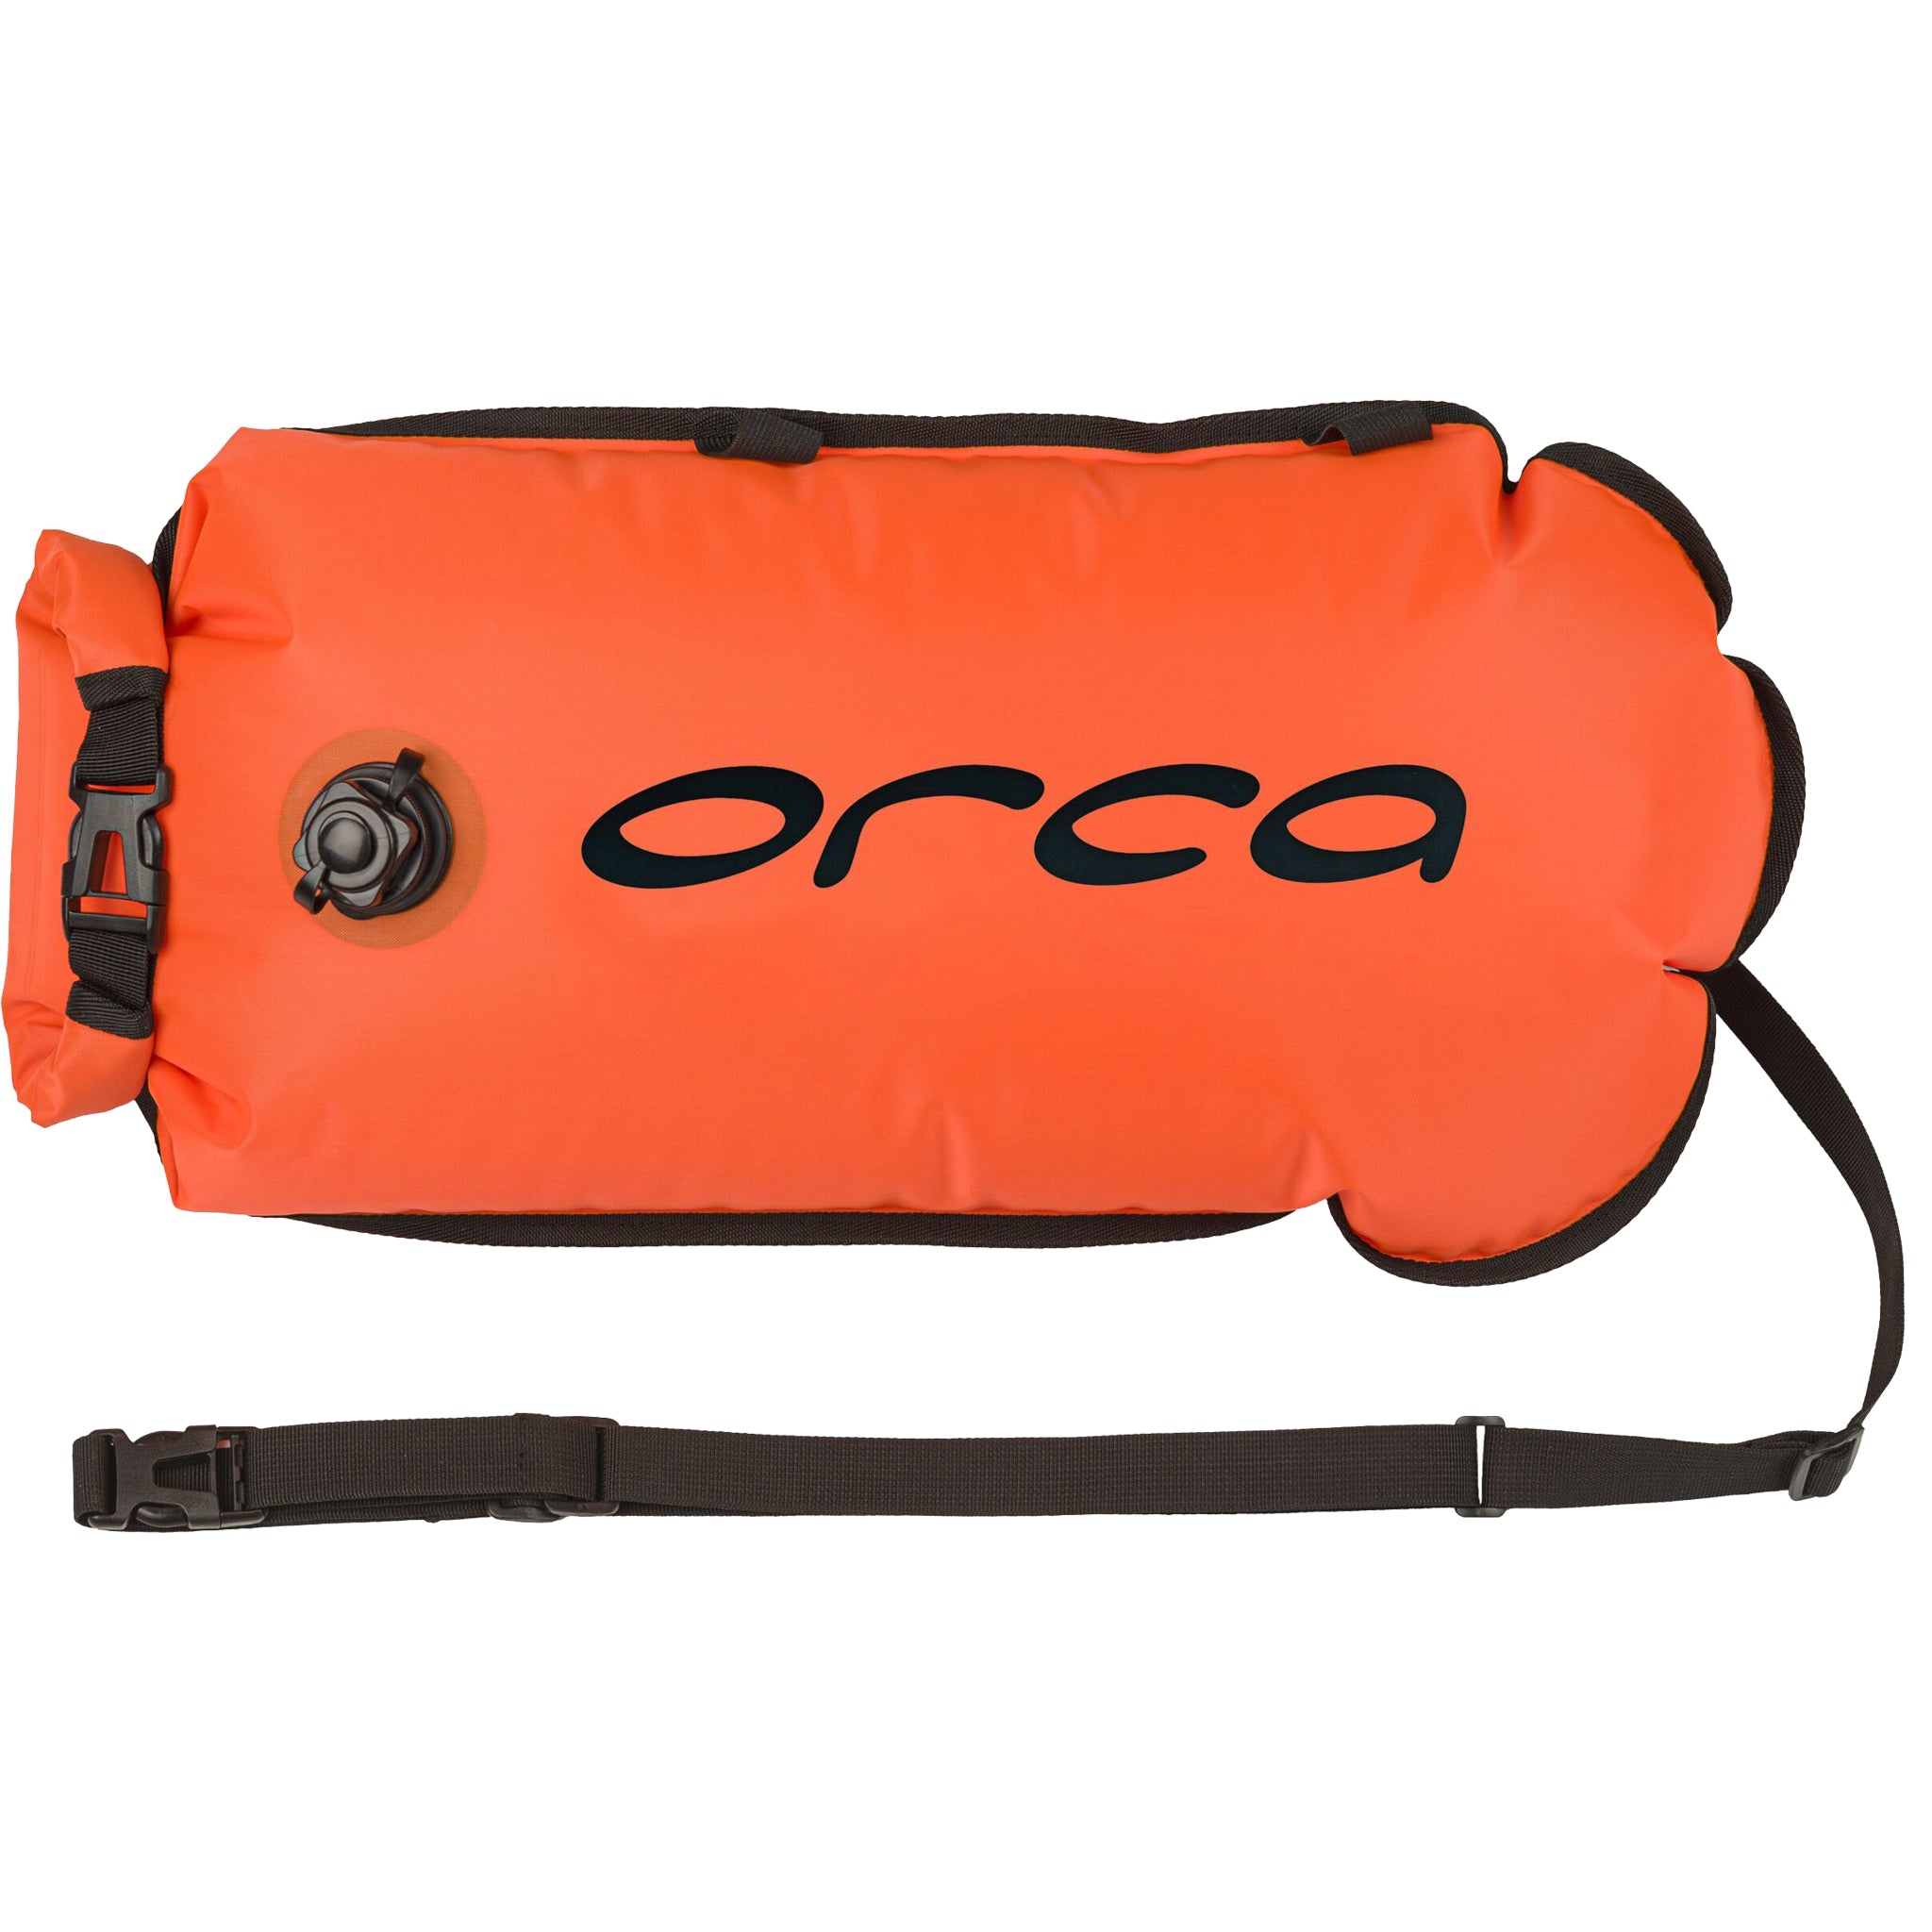 Orca Safety Buoy with external mesh Pocket